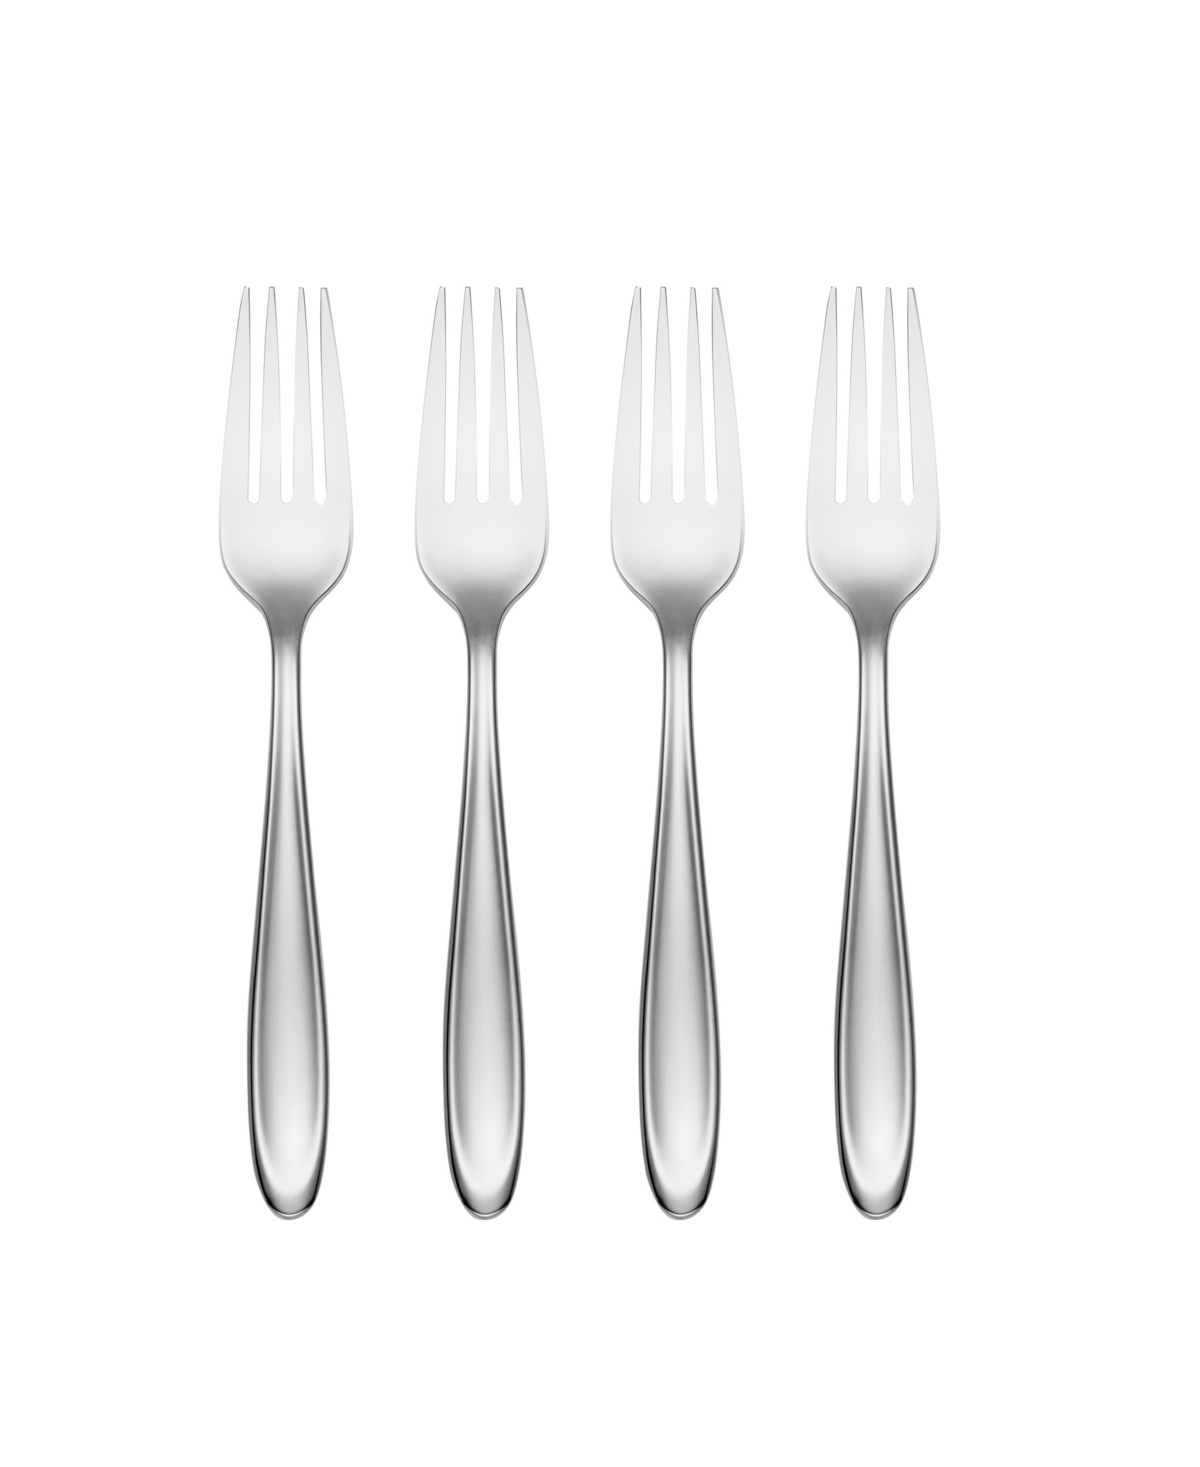 Lenox Cantera Salad Forks, Set Of 4 In Metallic And Stainless